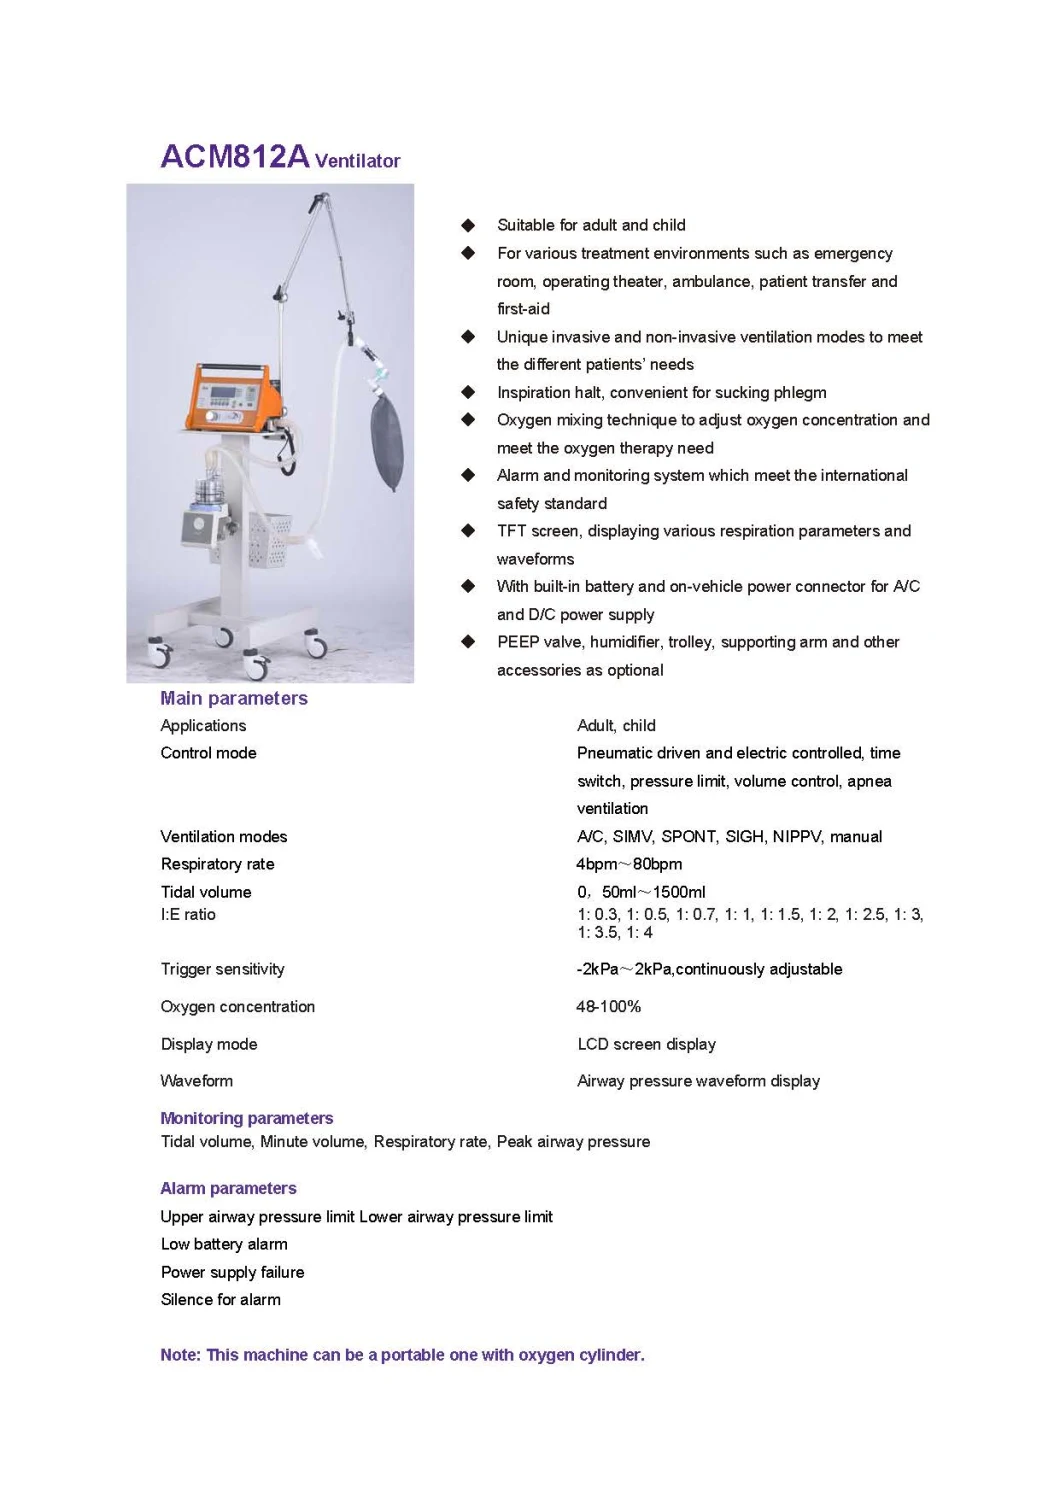 Acm812A Invasive Mechanical Ventilation for Adult and Child Yh-830 Yh-730 Medical Breathing Apparatus for Hospital ICU in Stock